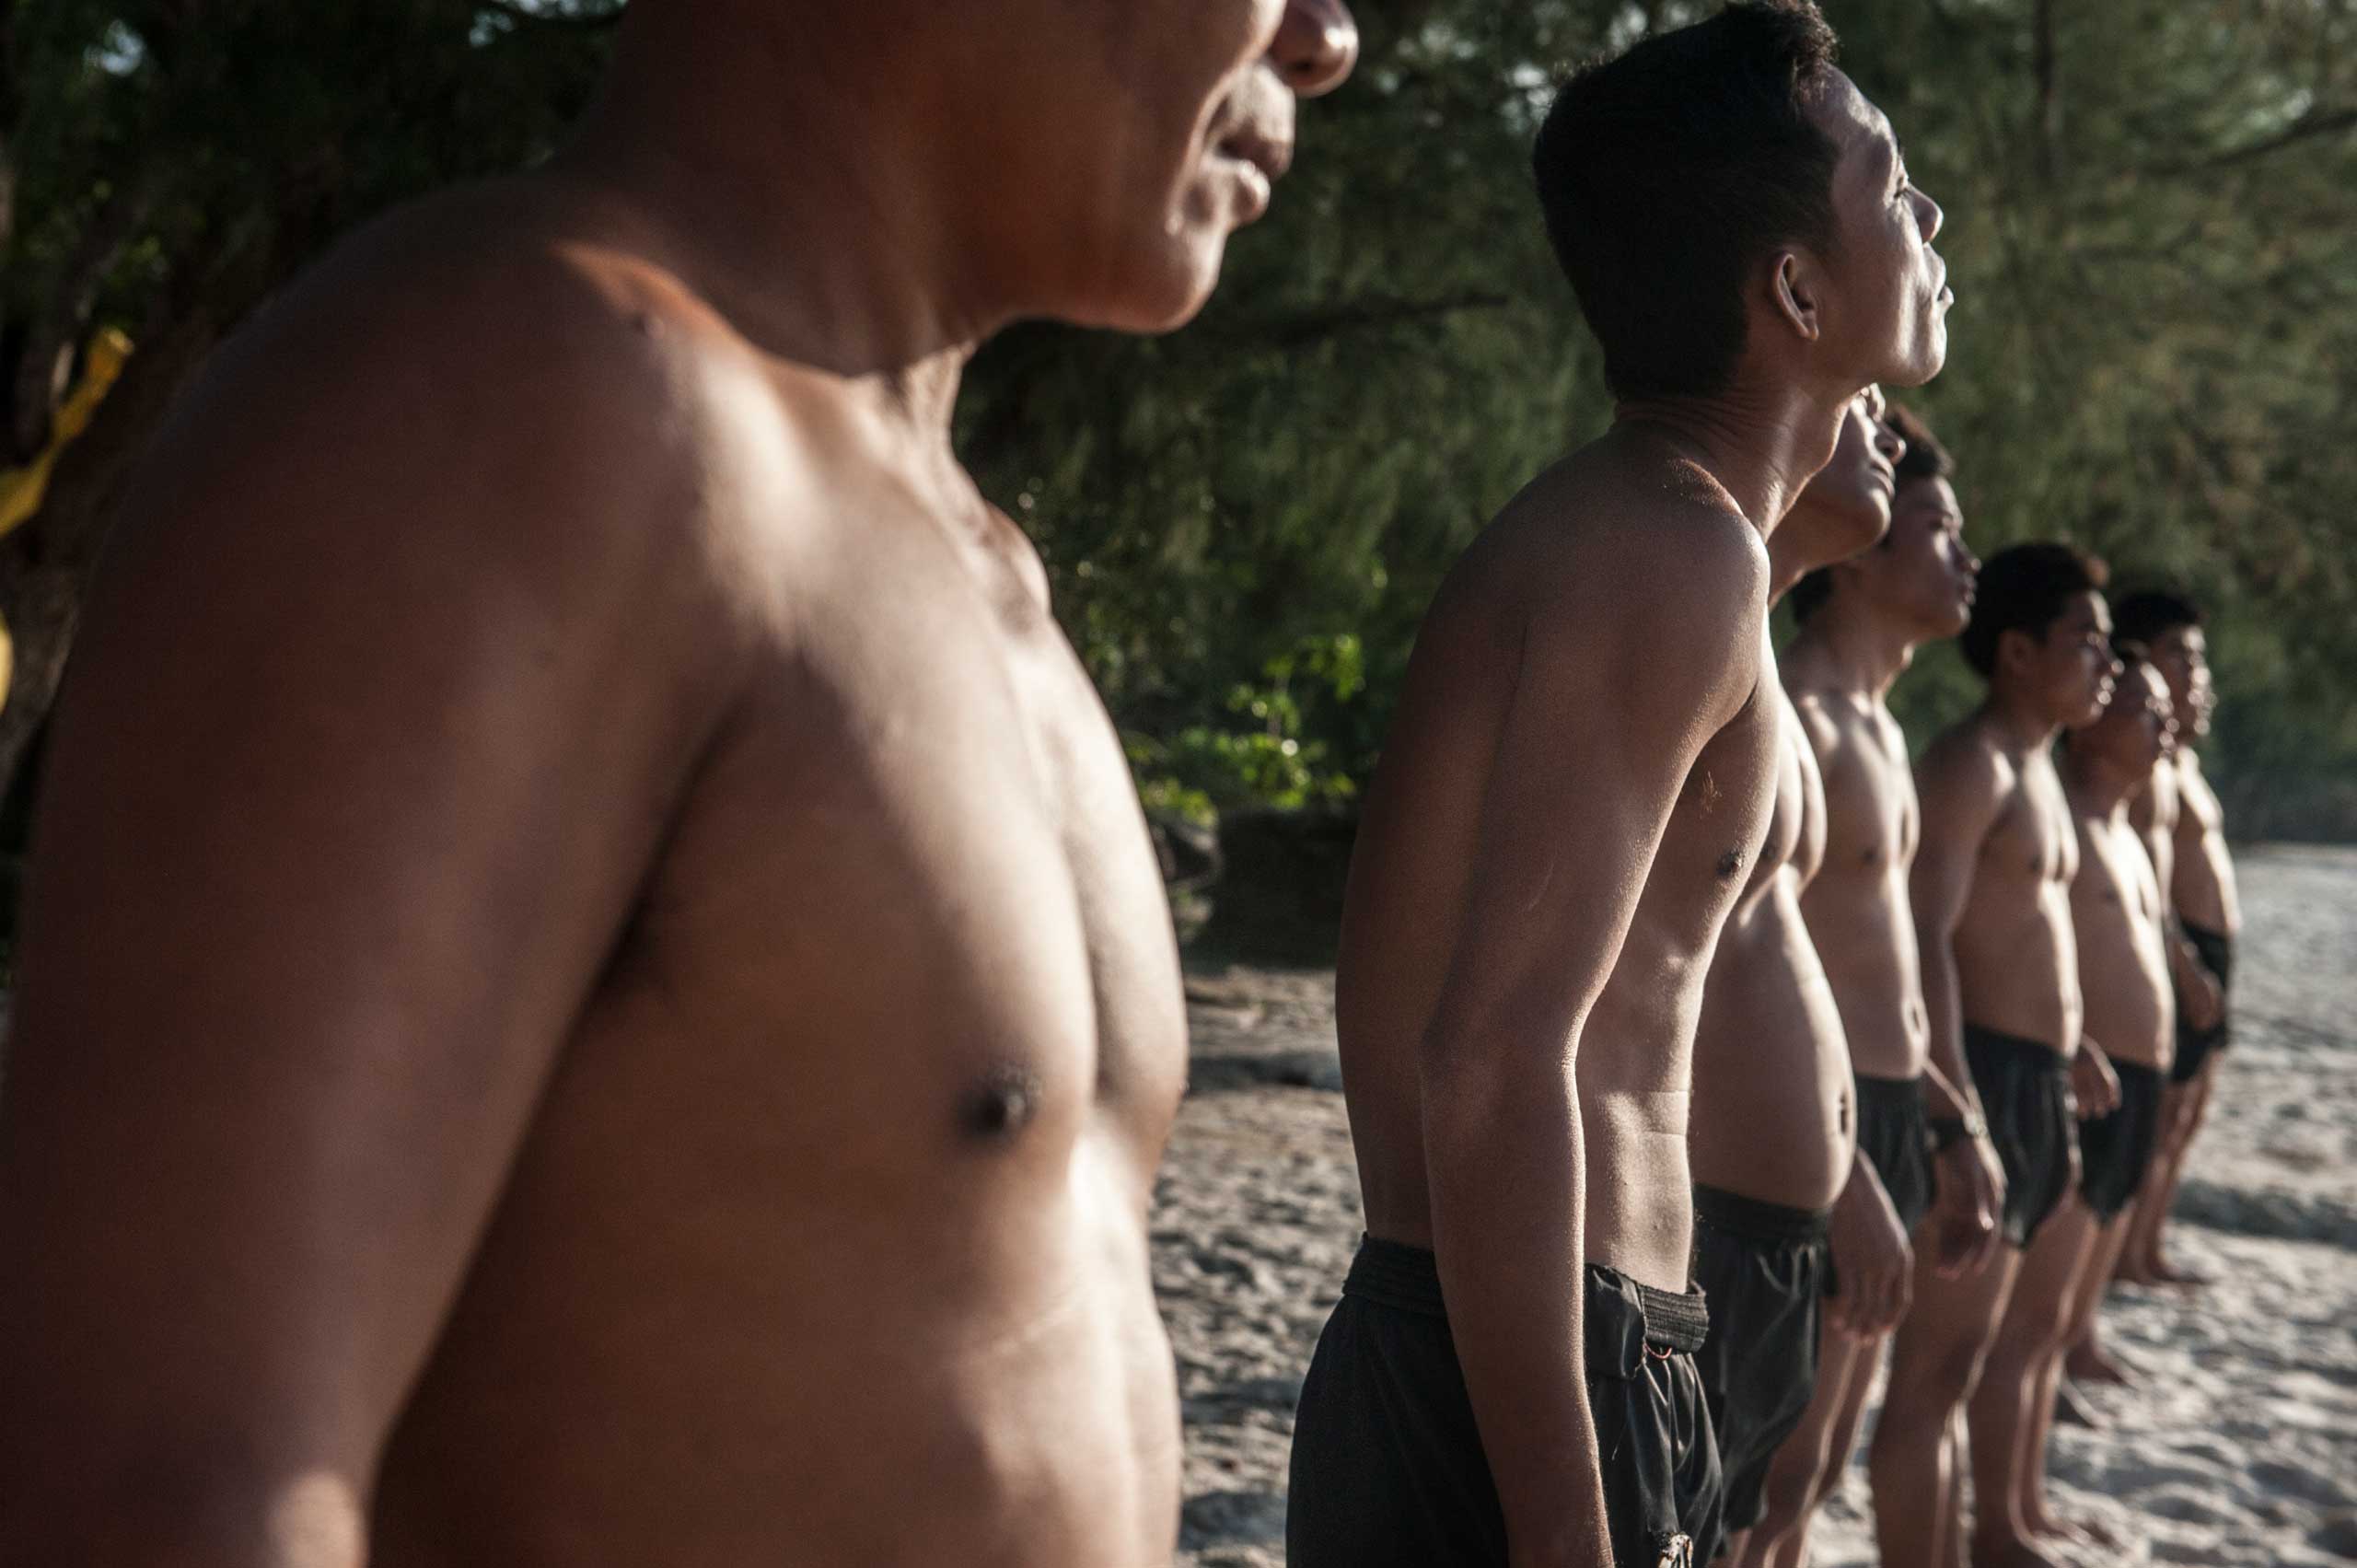 The UXO salvage diver team lines up ahead of a sea swim for training on the island of Koh Rong off the coast of Sihanoukville, Cambodia in April 2013. The divers were previously de-miners with the Cambodian Mine Action Centre and were selected by the Golden West Humanitarian Foundation from a group of over 40 applicants.